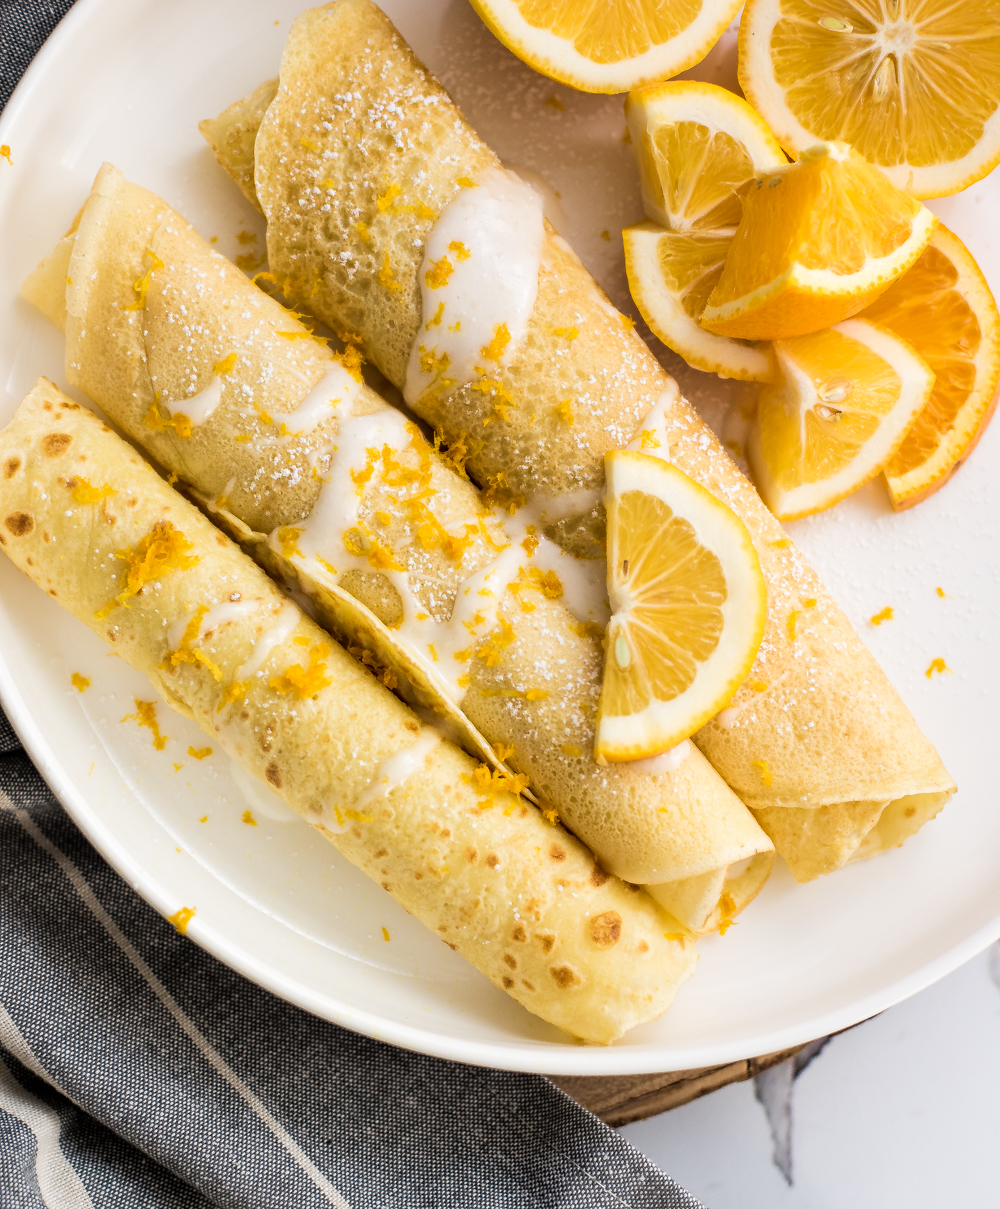 Citrus Lavender Crepes with Amaretto-Infused Greek Yogurt are the perfect addition to your weekend brunch menus! They are bright and super simple to make!